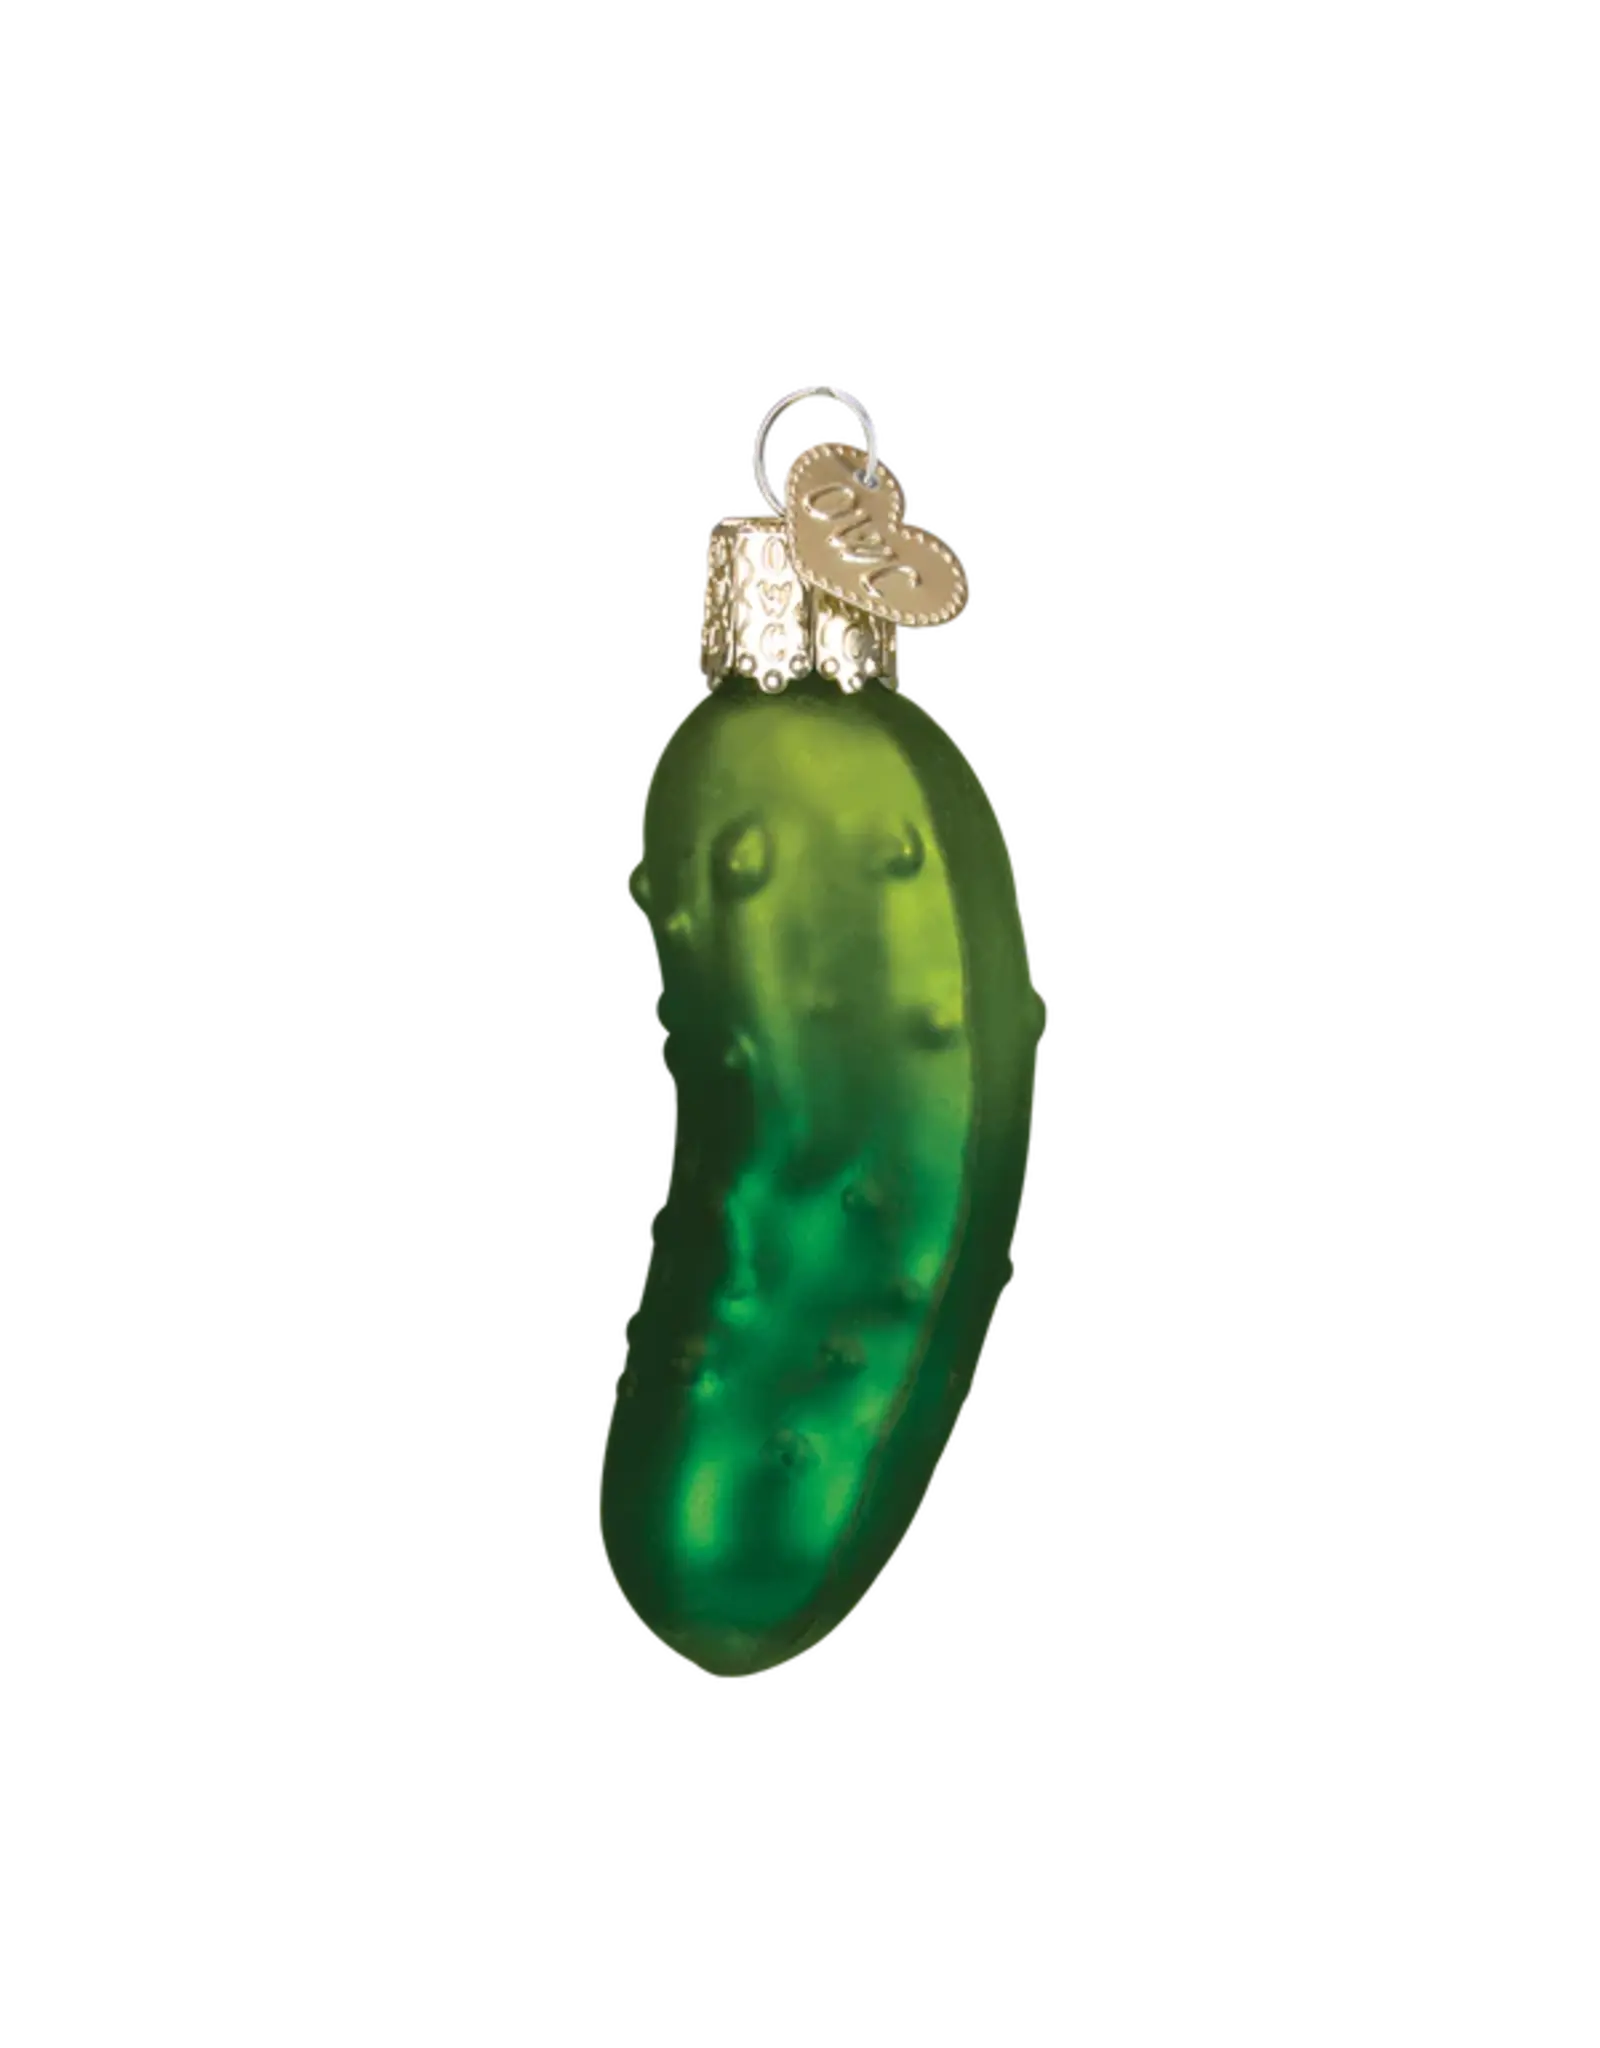 Old World Christmas Sweet Pickle Ornament